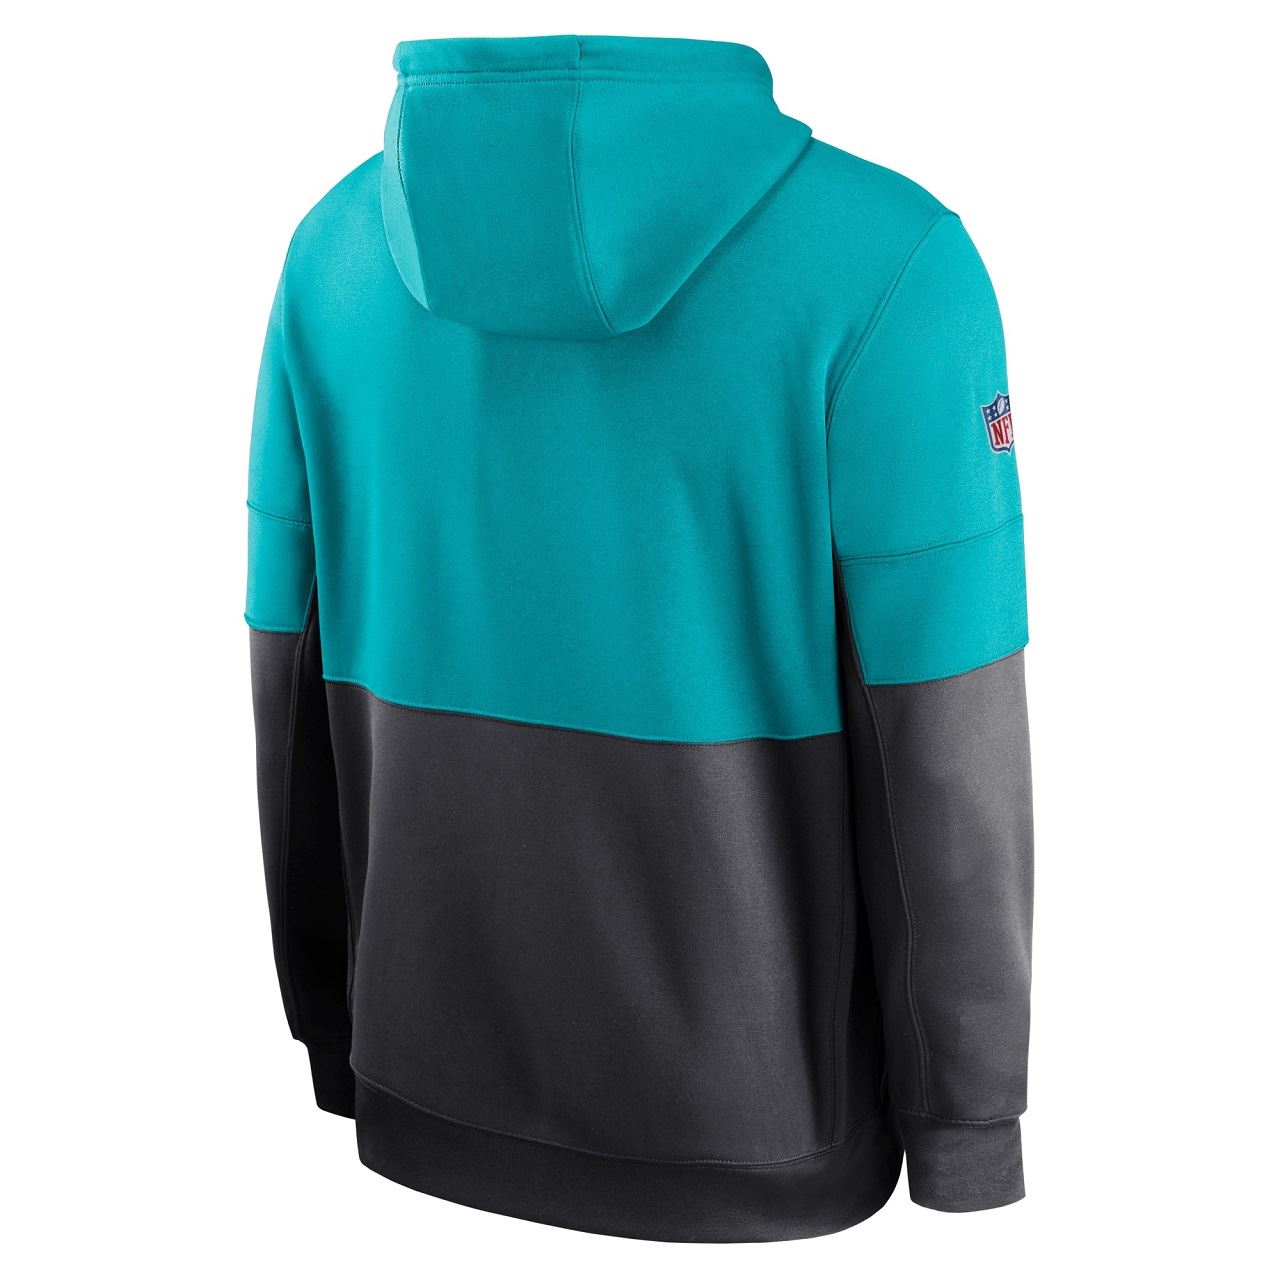 Miami Dolphins NFL Team Name Lockup Therma Pullover Turbo Green / Anthracite Hoody Nike